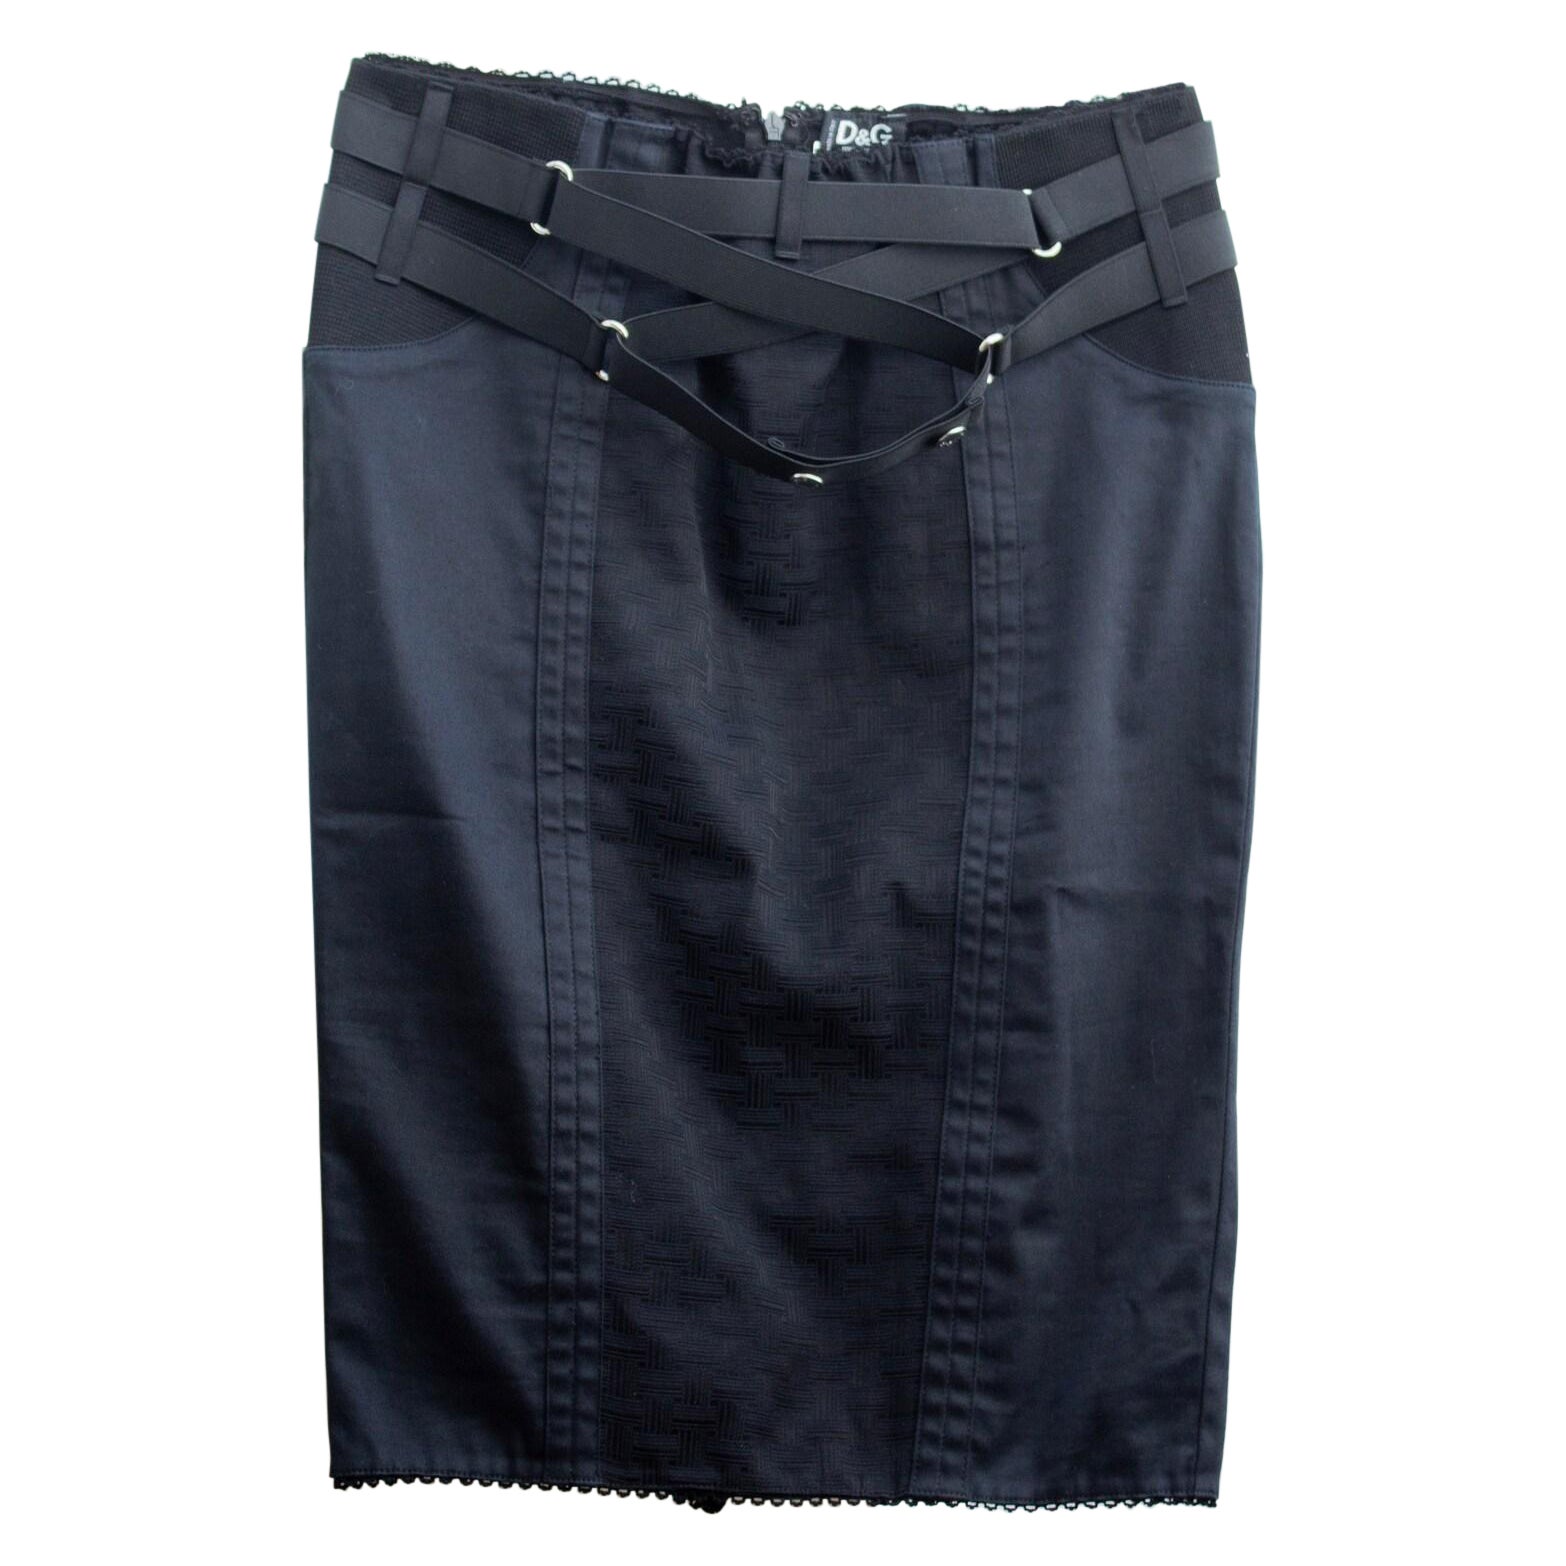 D&G f/w 2003 black patterned cotton and acetate bondage strap corseted skirt  For Sale